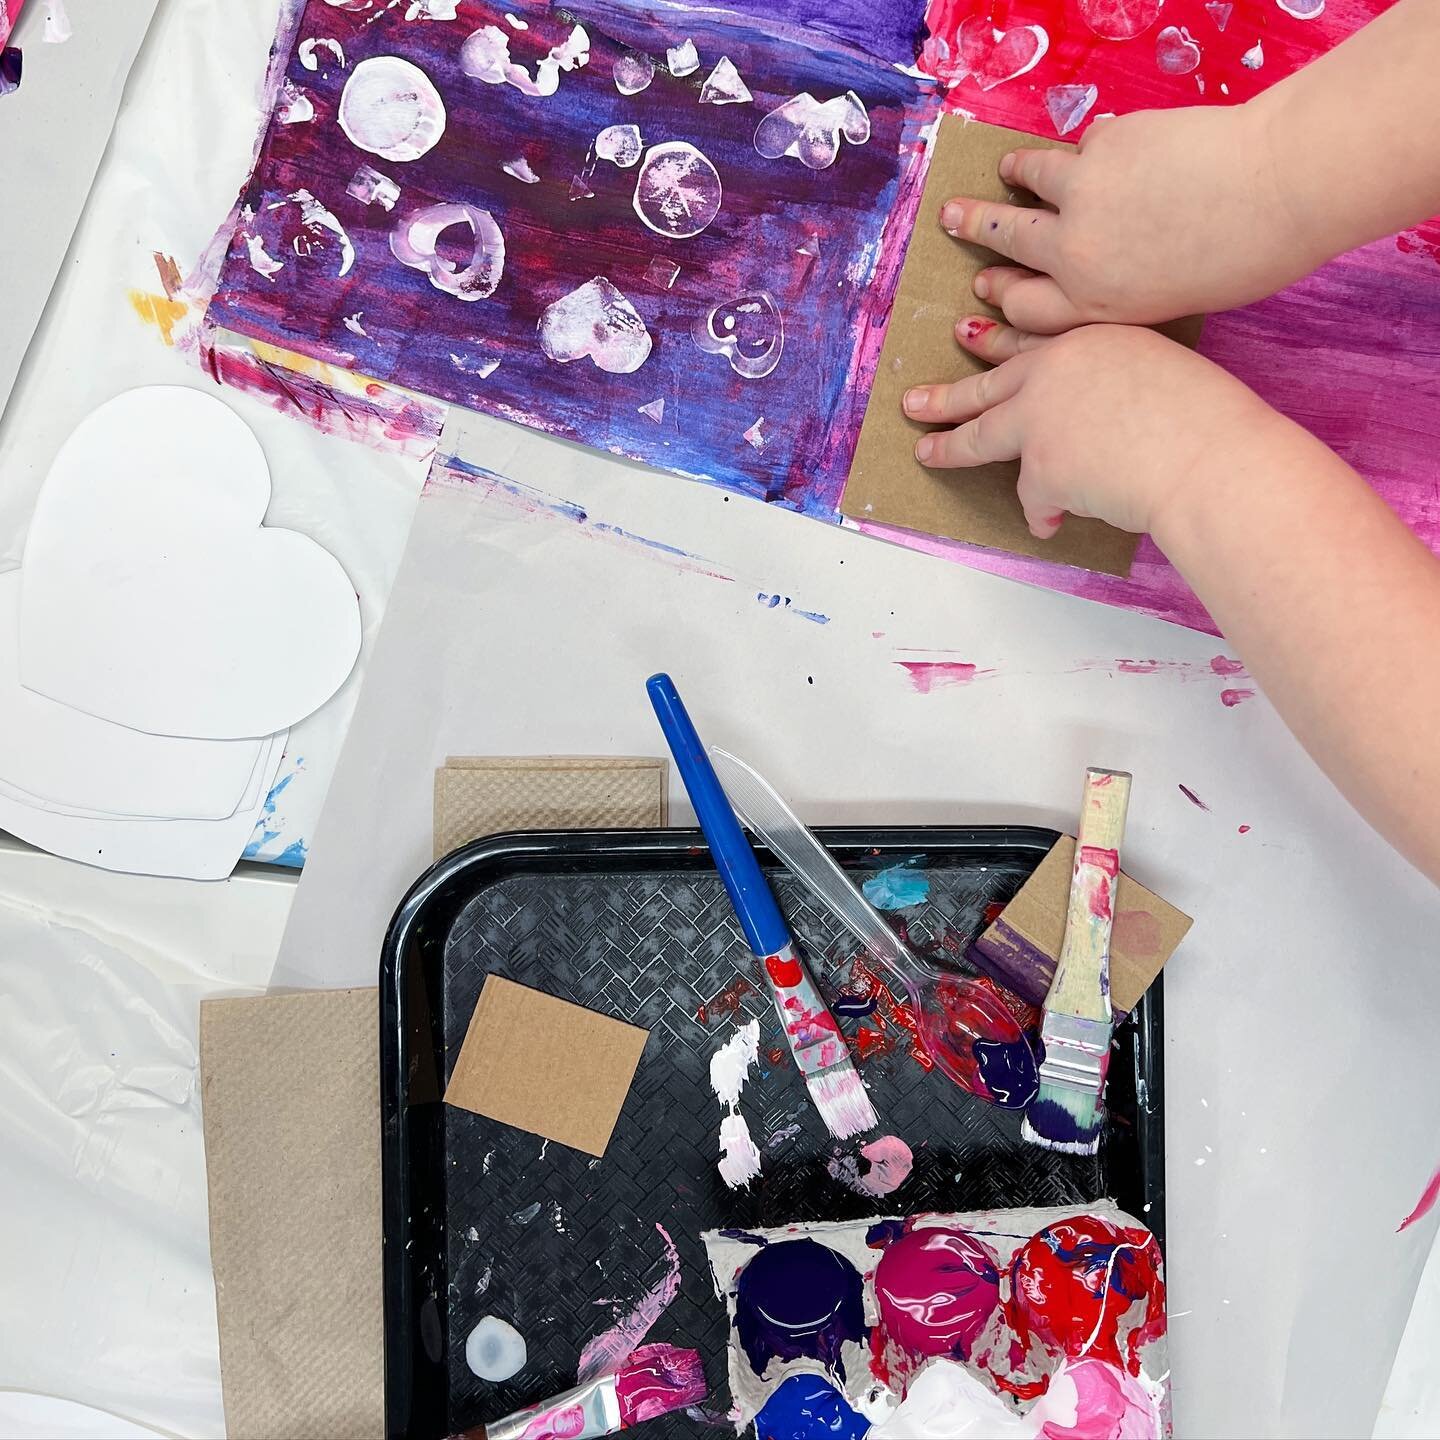 Can&rsquo;t wait to see all the little hands in the studio soon! 🎨⁣
Classes start September 12th. Reminders going out this weekend.⁣
Last remaining Little Artist spots are Fridays 10:45. ⁣
⁣
#letspaint #handsonlearning ⁣
#rhodymade #rhodymoms